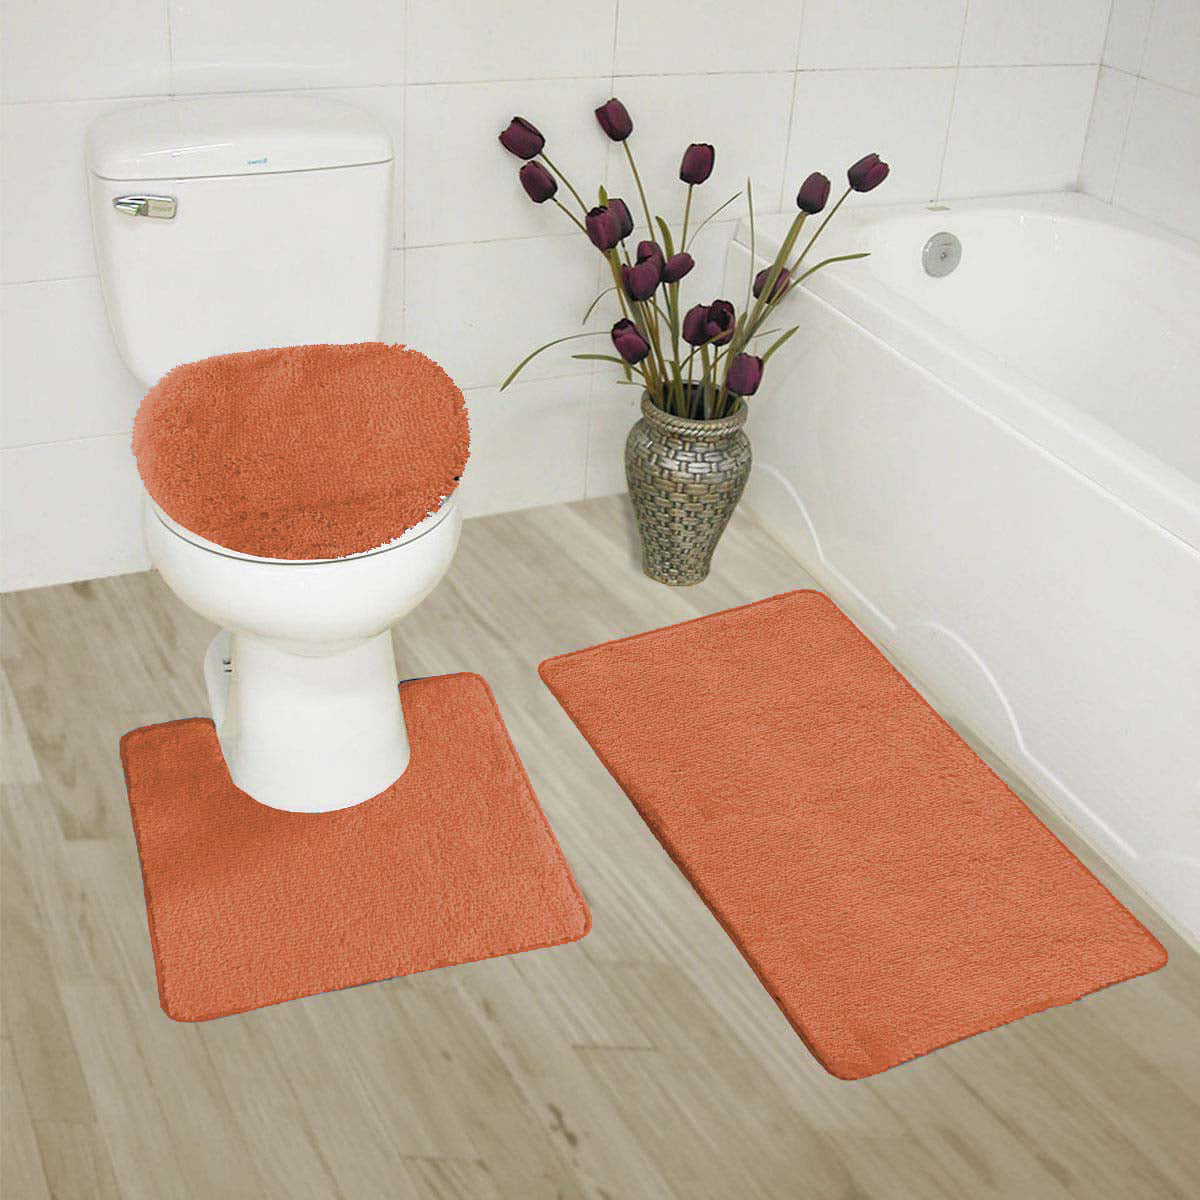 Natural Scenery Bathroom Carpet Decoration Toilet Cover Rug Absorbent Foot Mat 